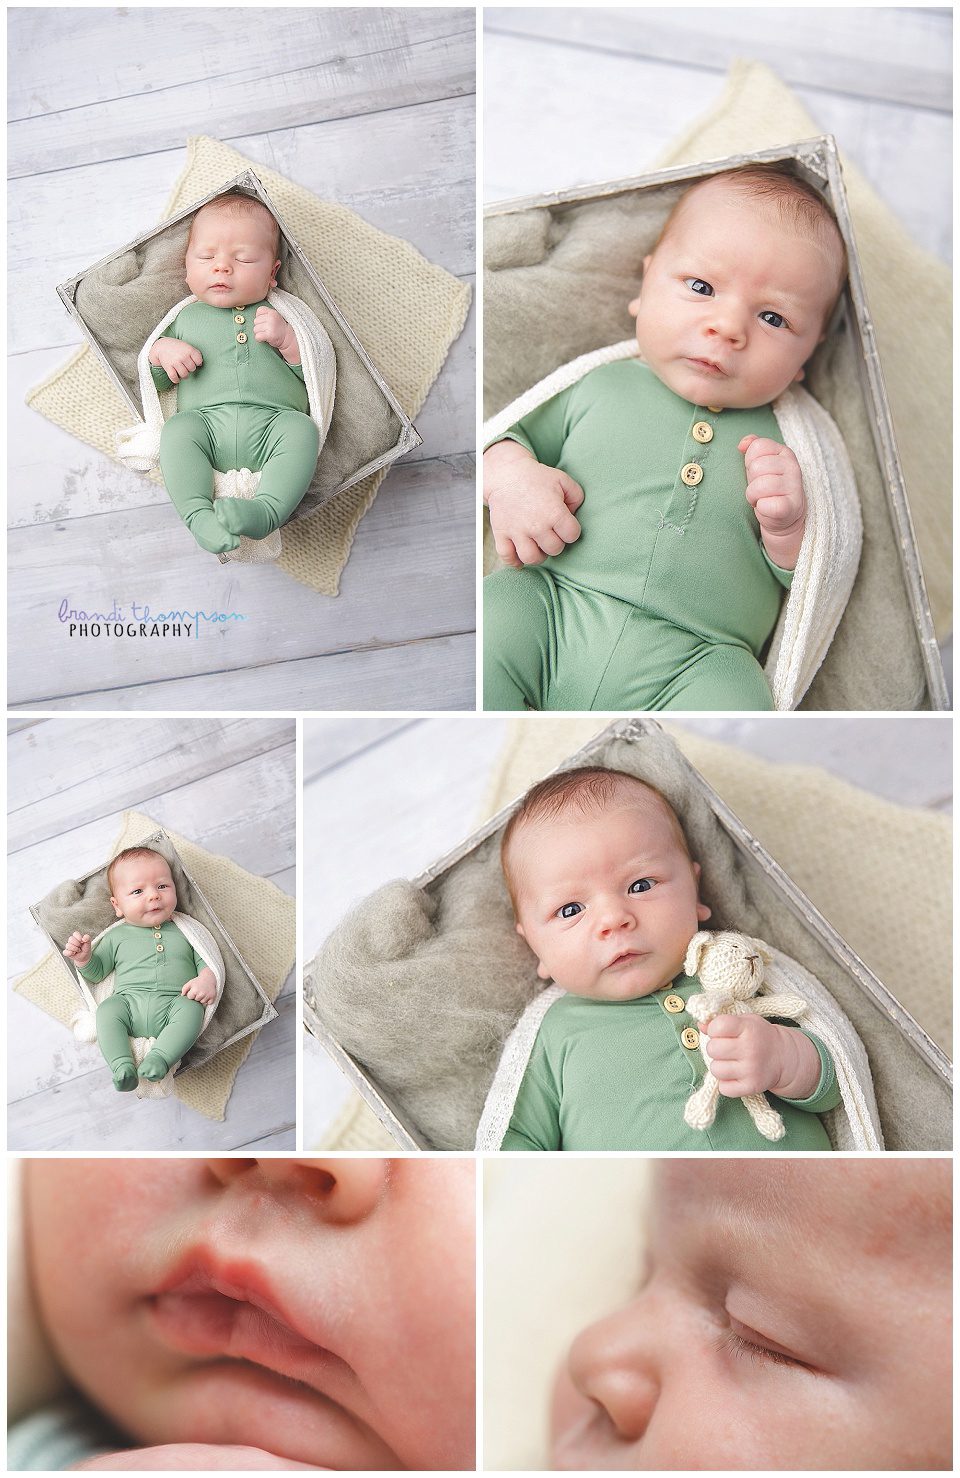 collage of newborn white baby boy images, some open eyes, some close up macro images